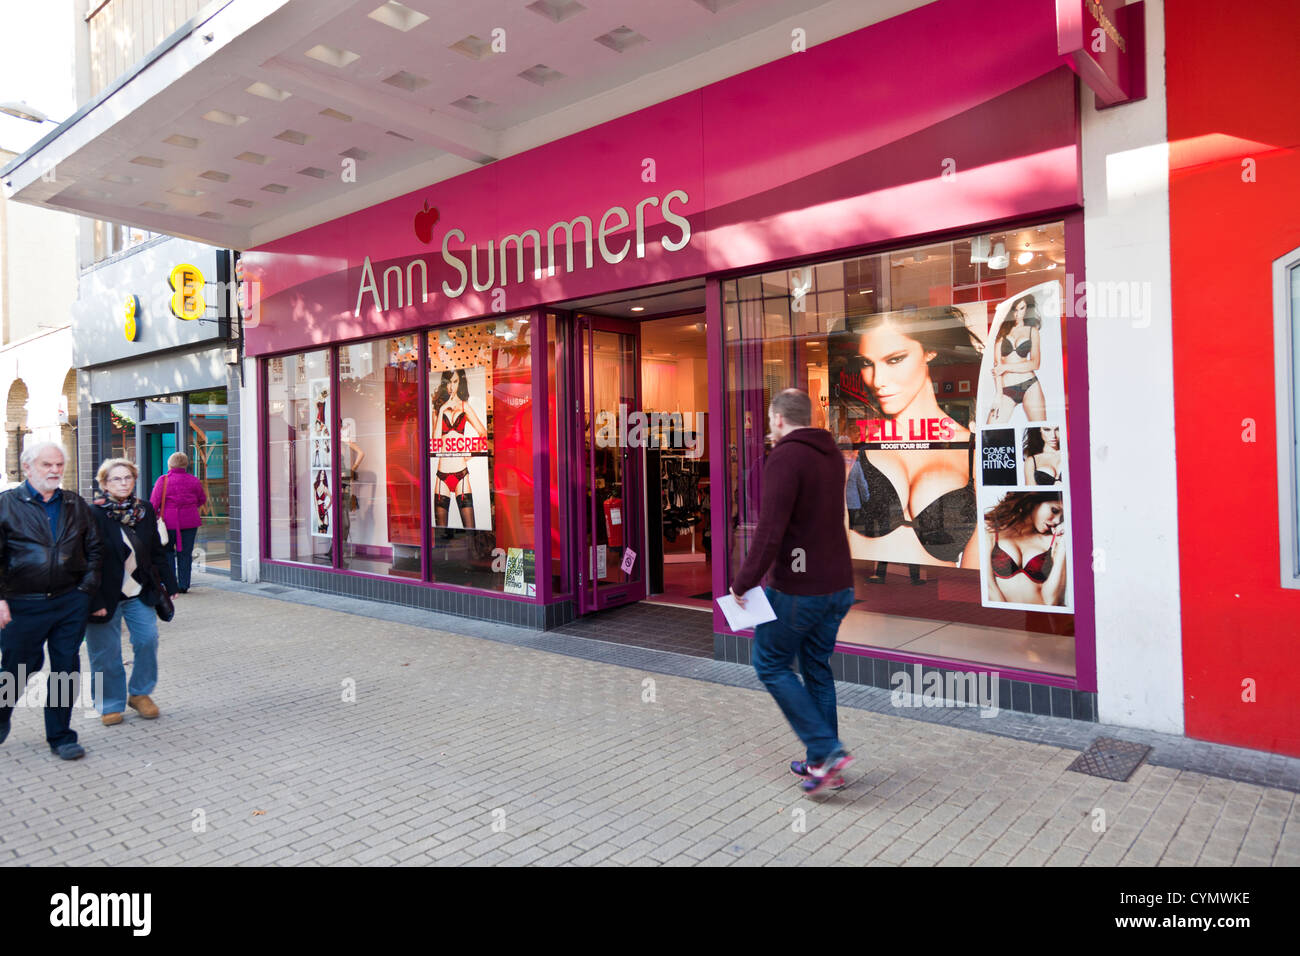 Ann Summers women sex shop selling naughty sexy underwear and sex